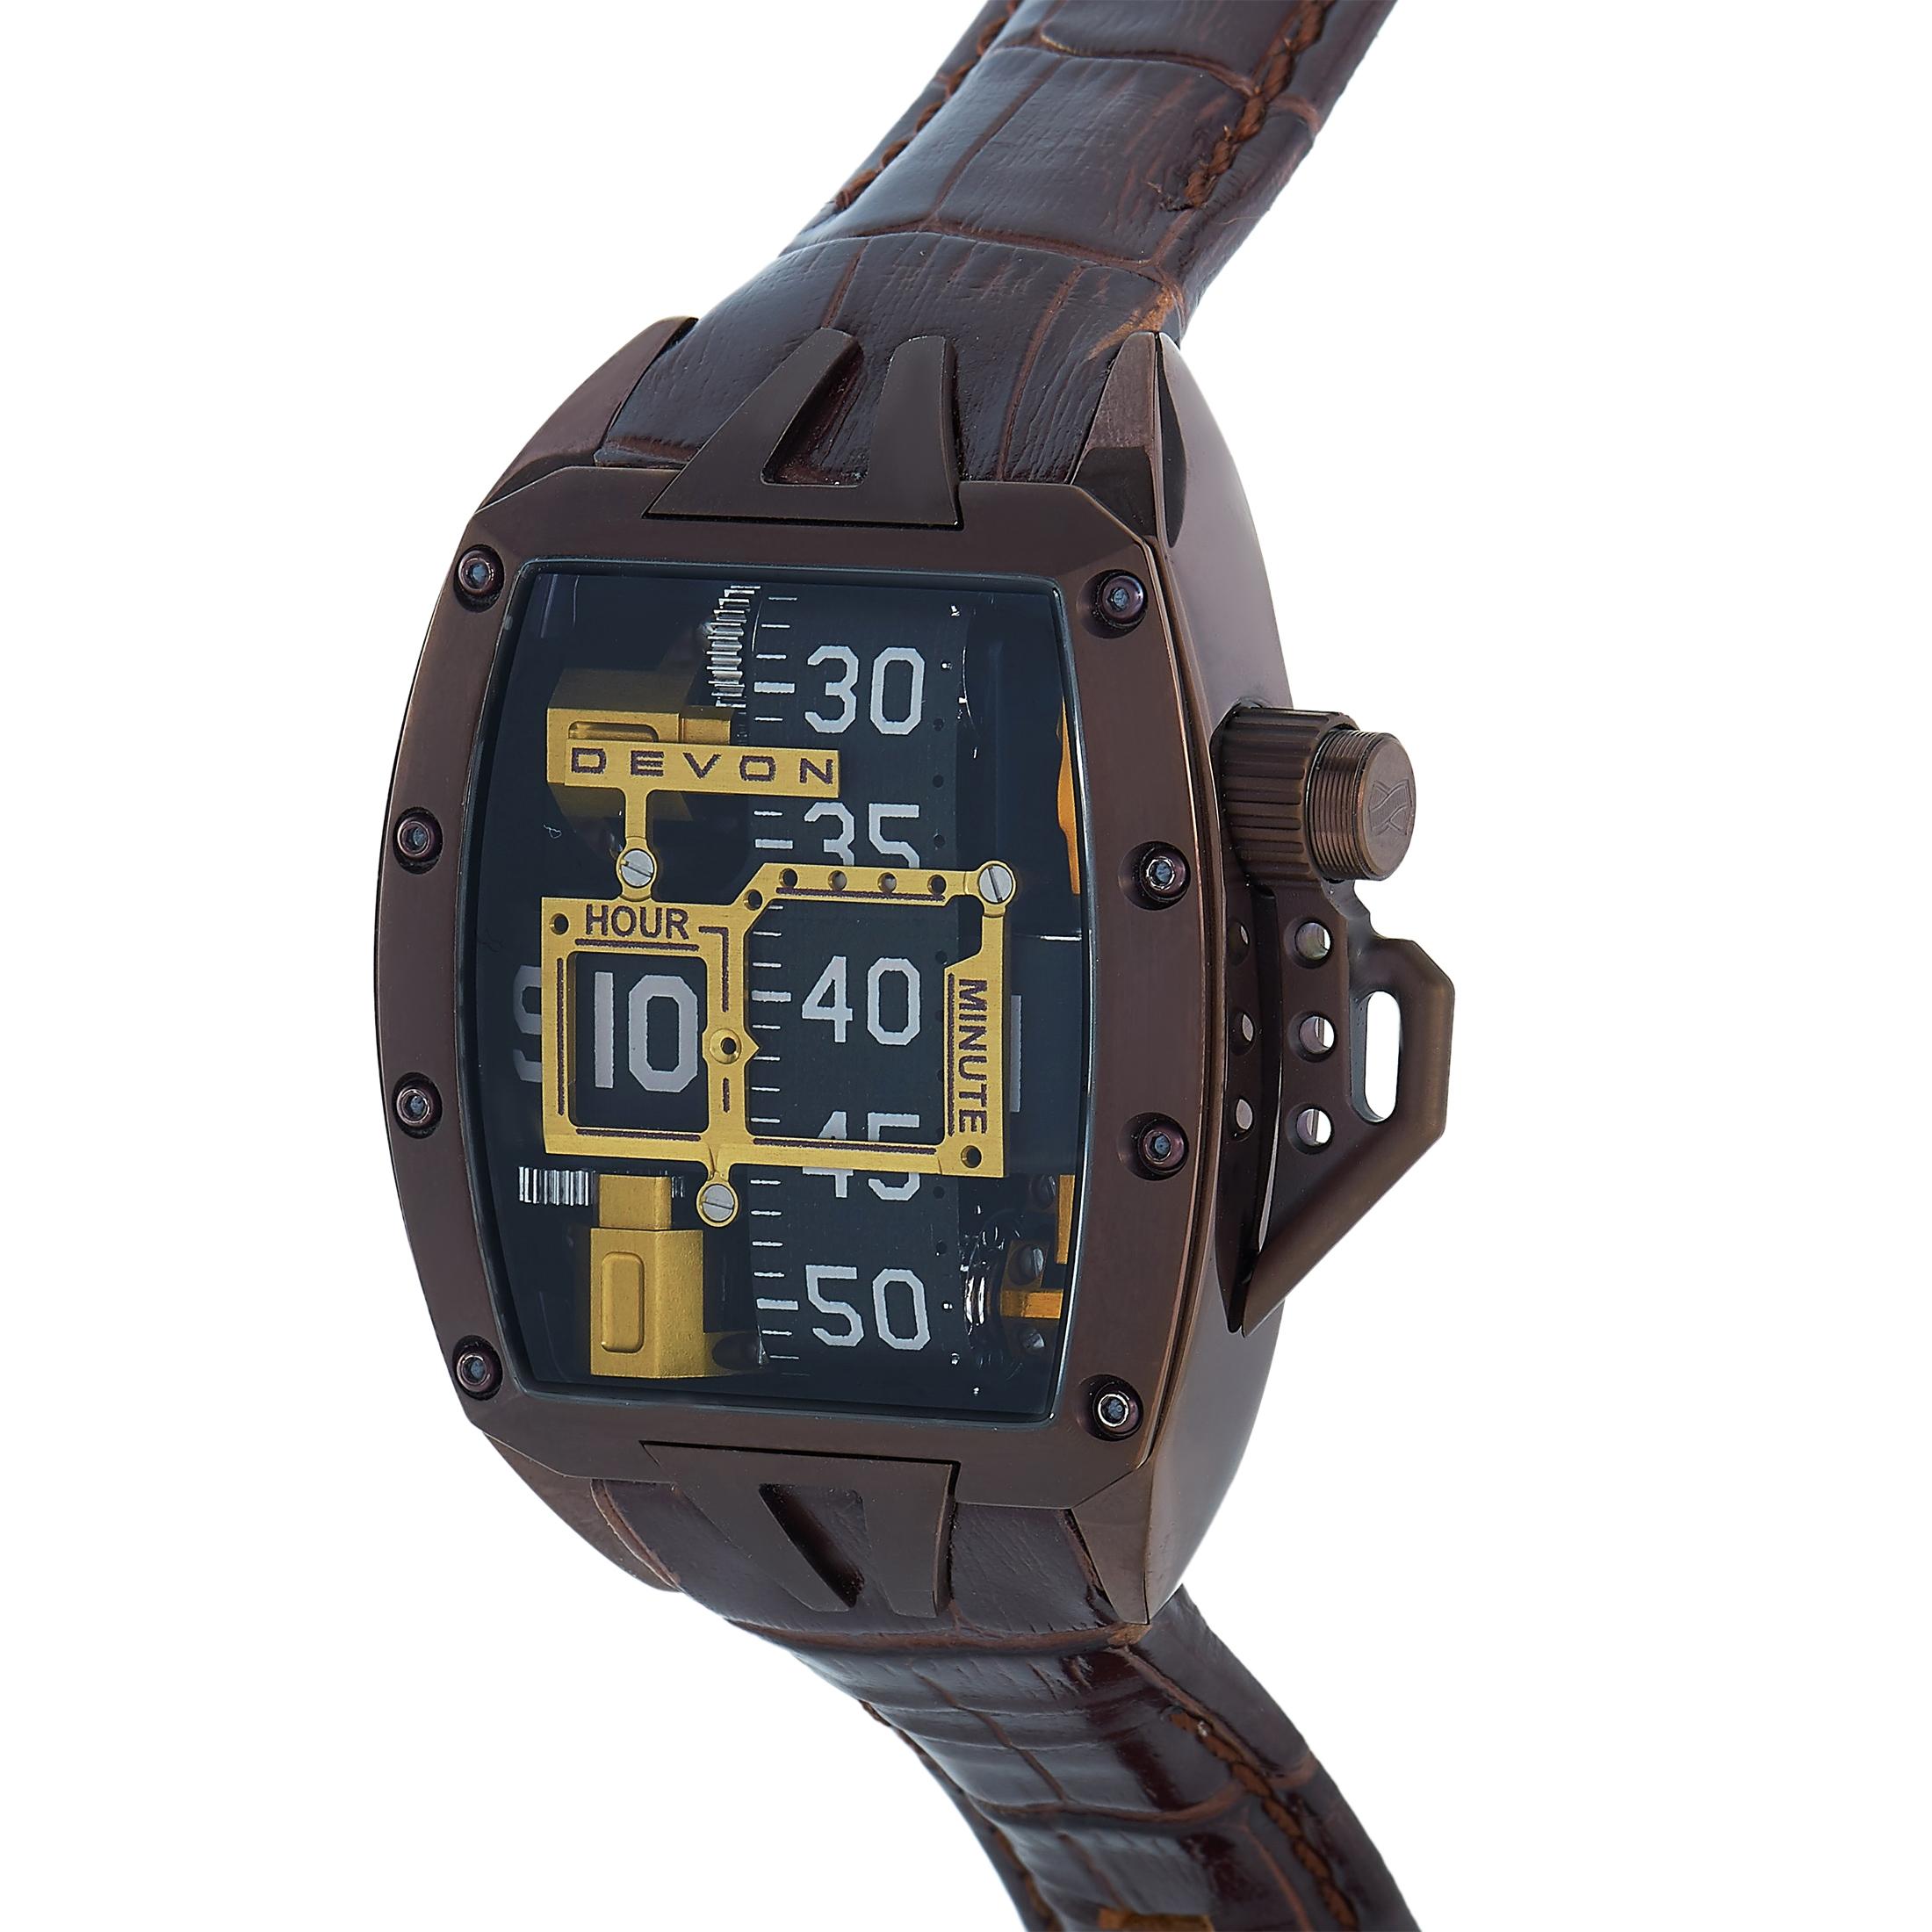 This is the Devon Tread 2 Godiva timepiece, reference number 847339004572.

The watch is presented with a chocolate brown PVD-coated stainless steel case that is water-resistant to 10 meters. The case is mounted onto a brown leather strap fitted